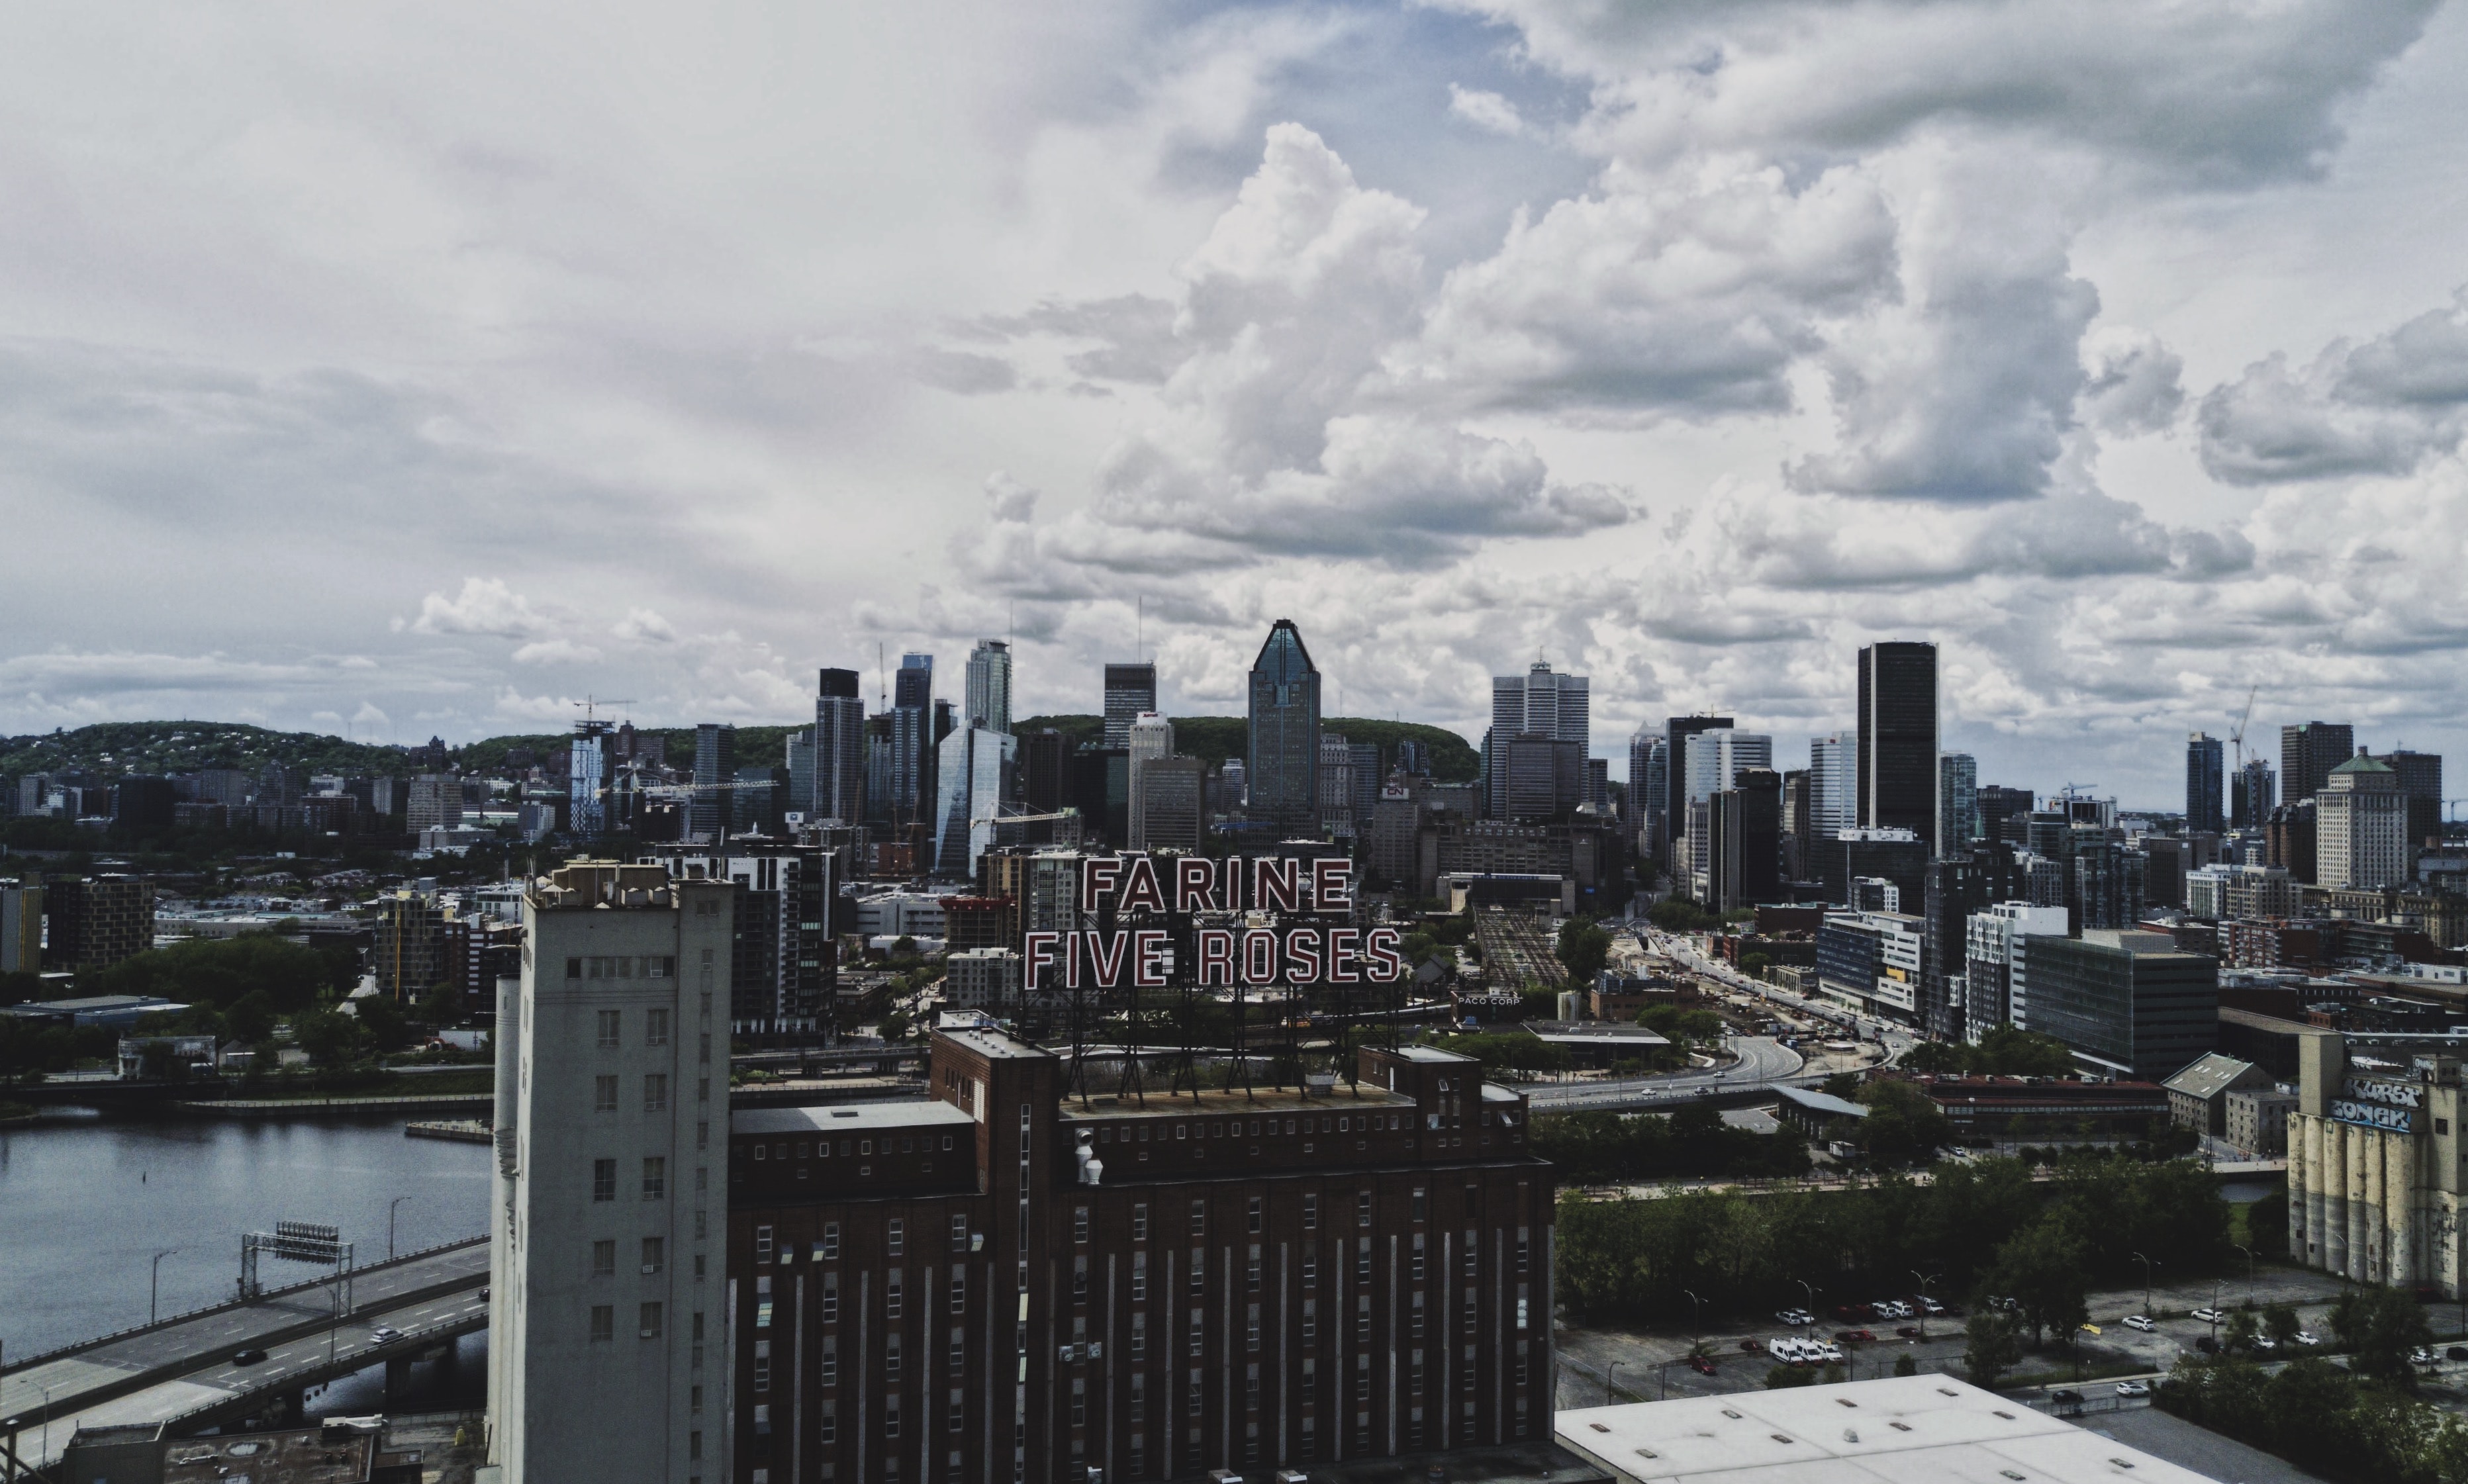 General 3728x2242 photography Montreal Canada urban skyline cityscape building city